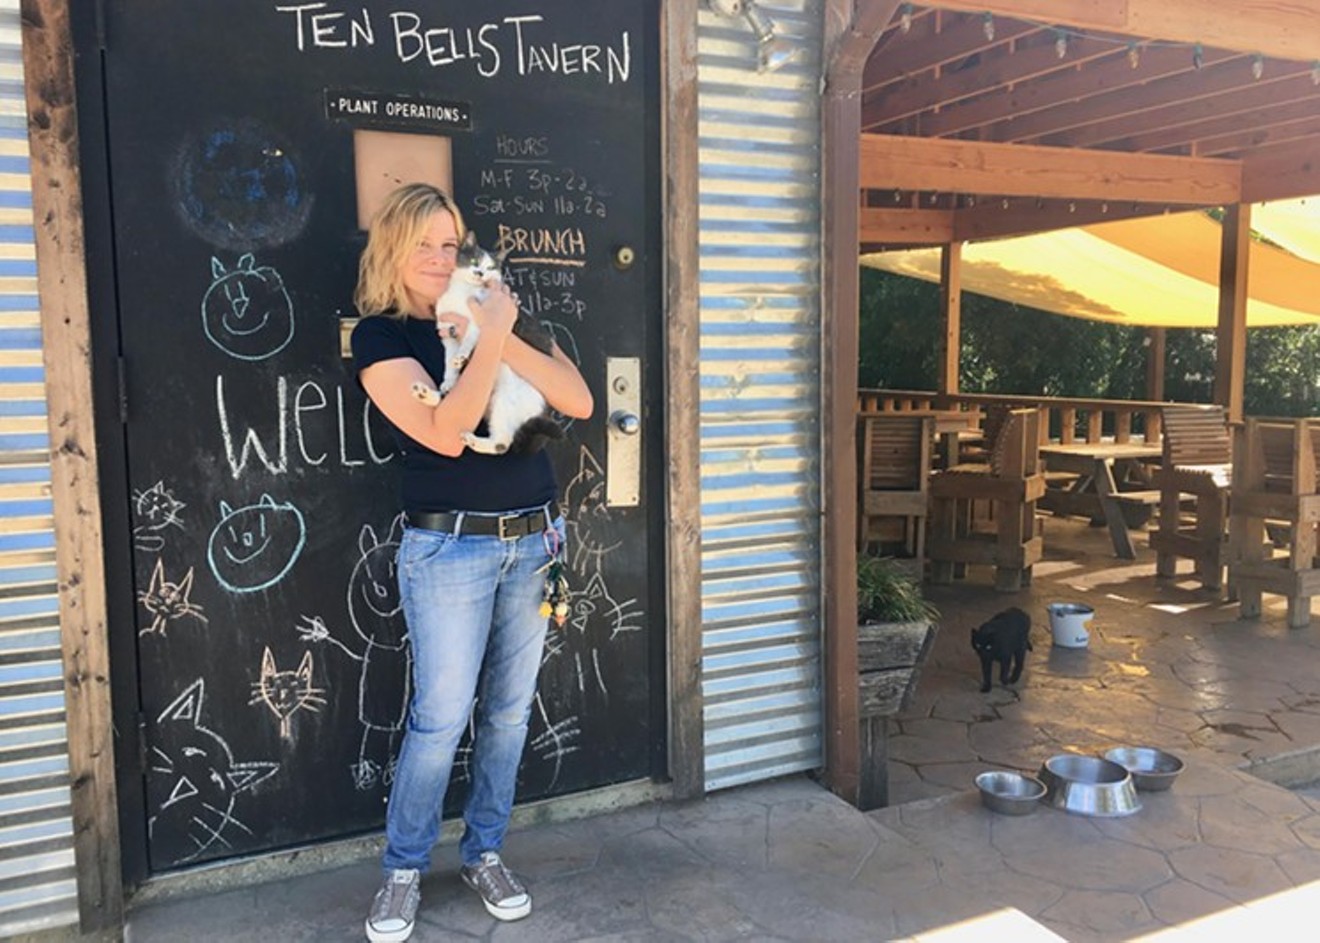 Ten Bells Tavern owner Meri Dahlke cuddled up with Lucy in October 2016.